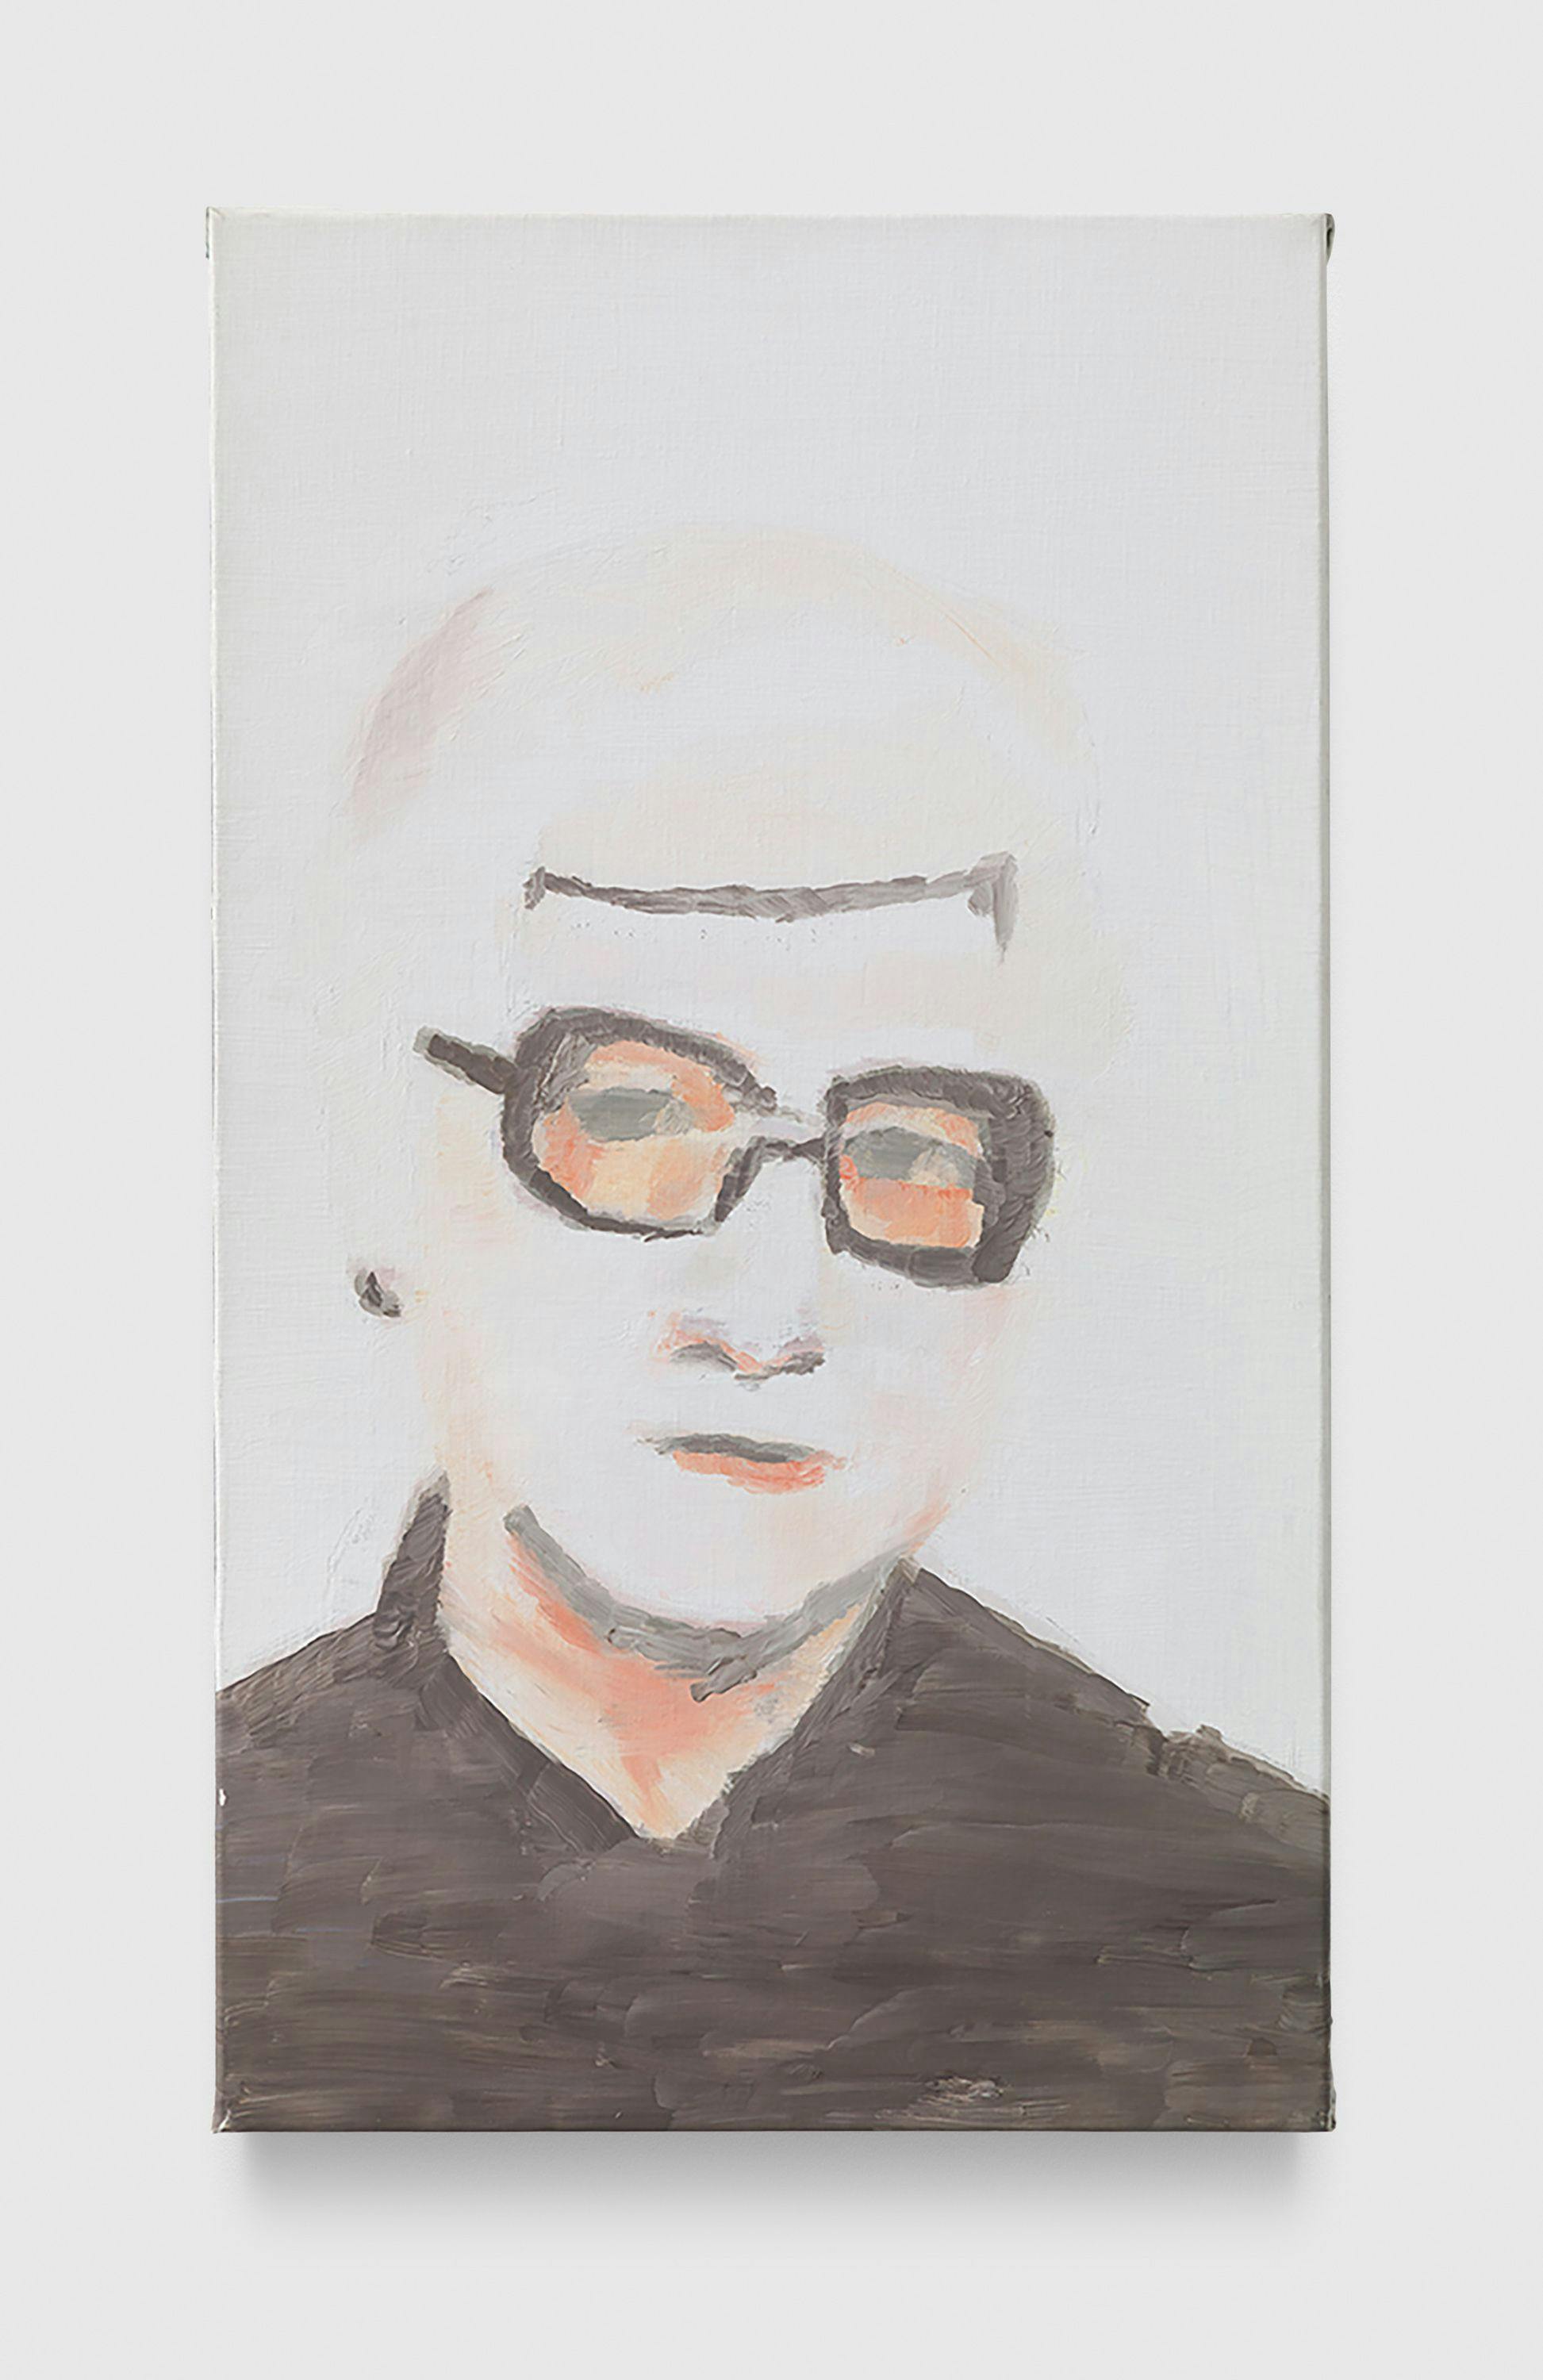 A painting by Luc Tuymans, titled Portrait, dated 2000.